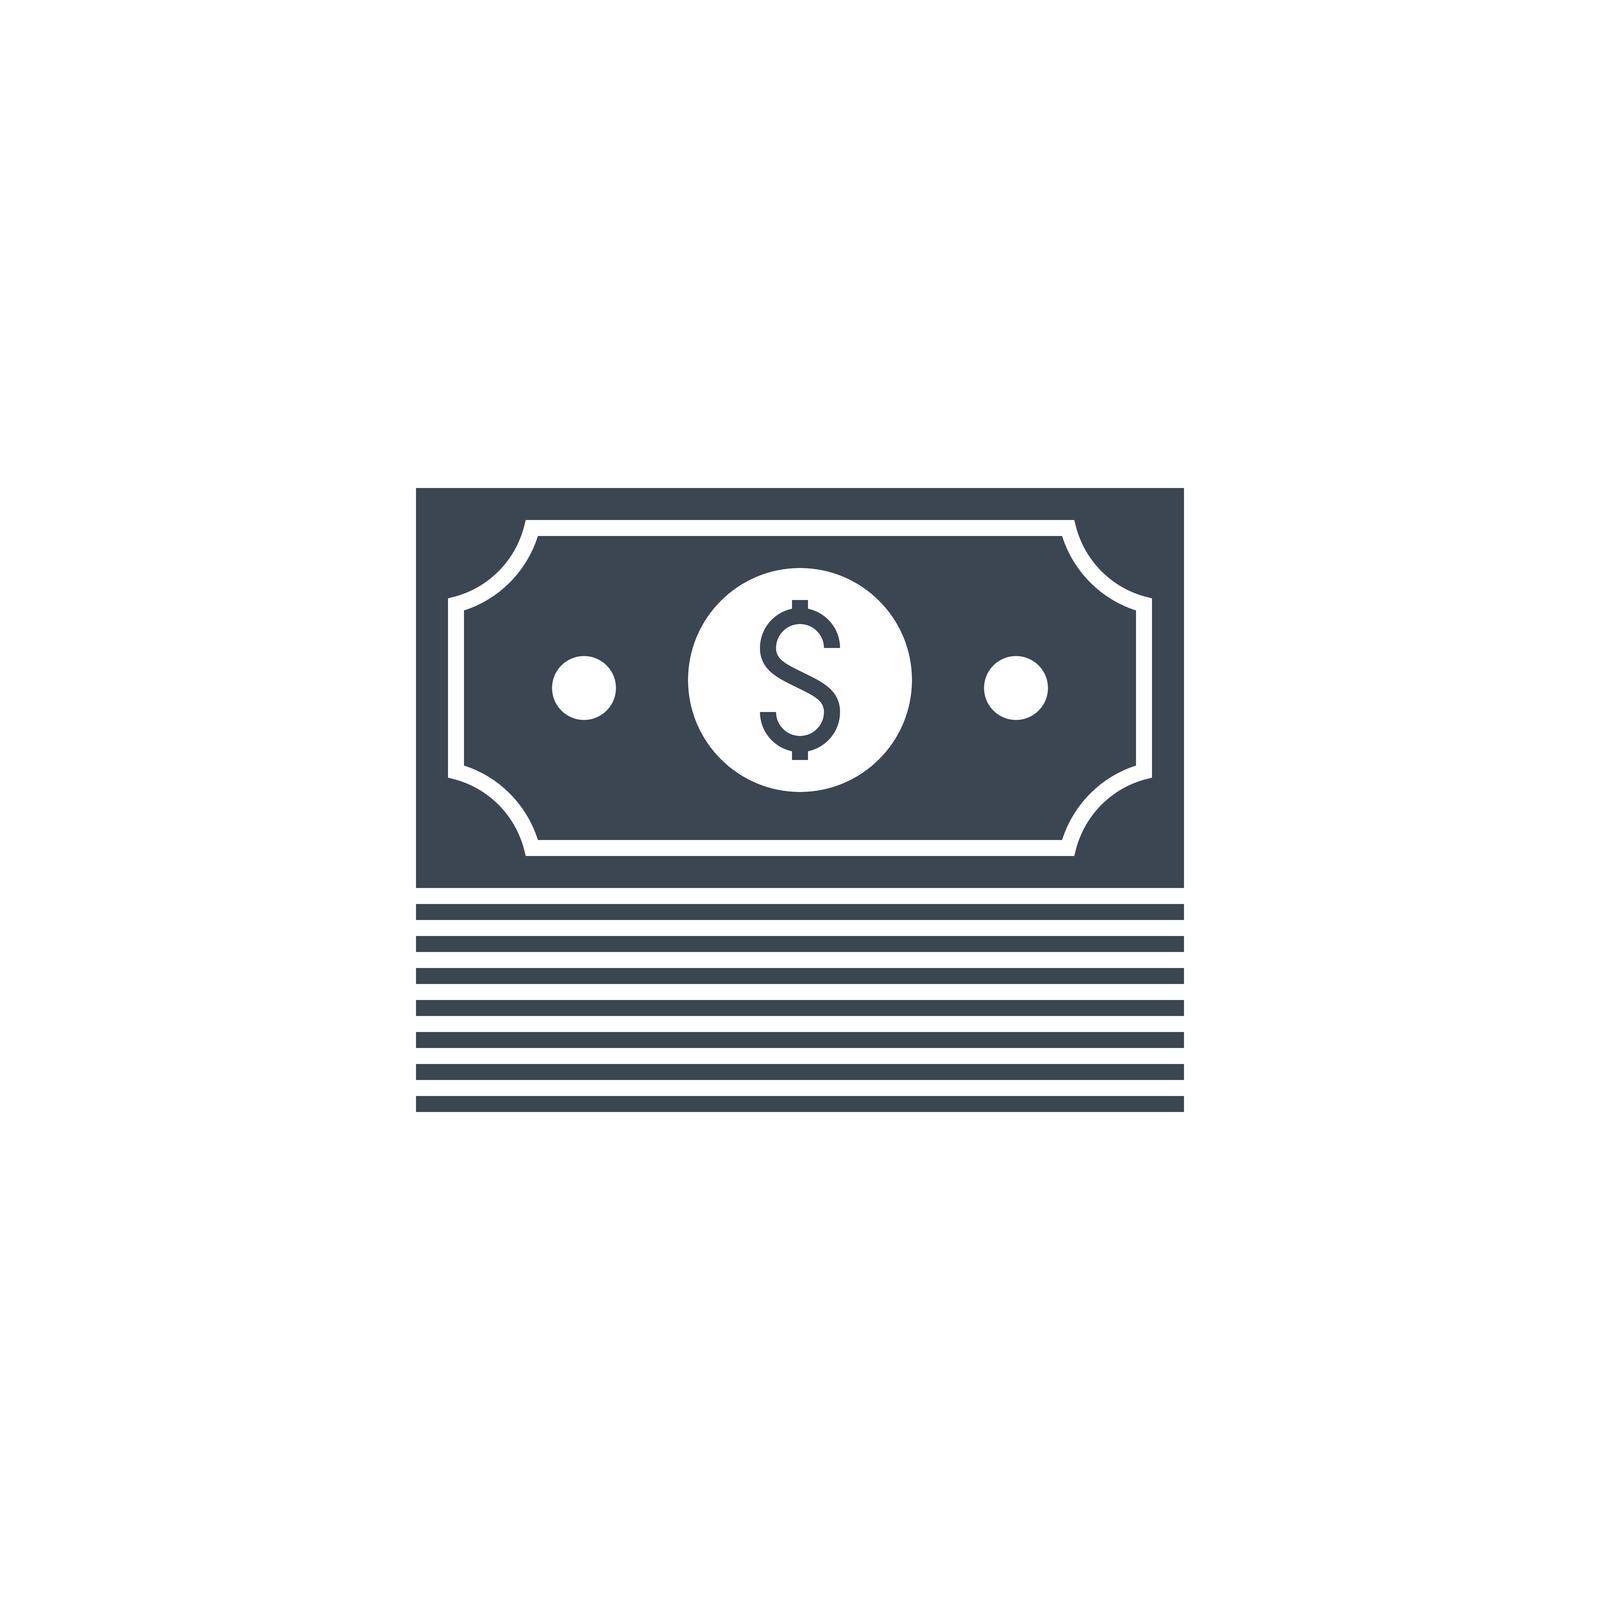 Money related vector glyph icon. Isolated on white background. Vector illustration.